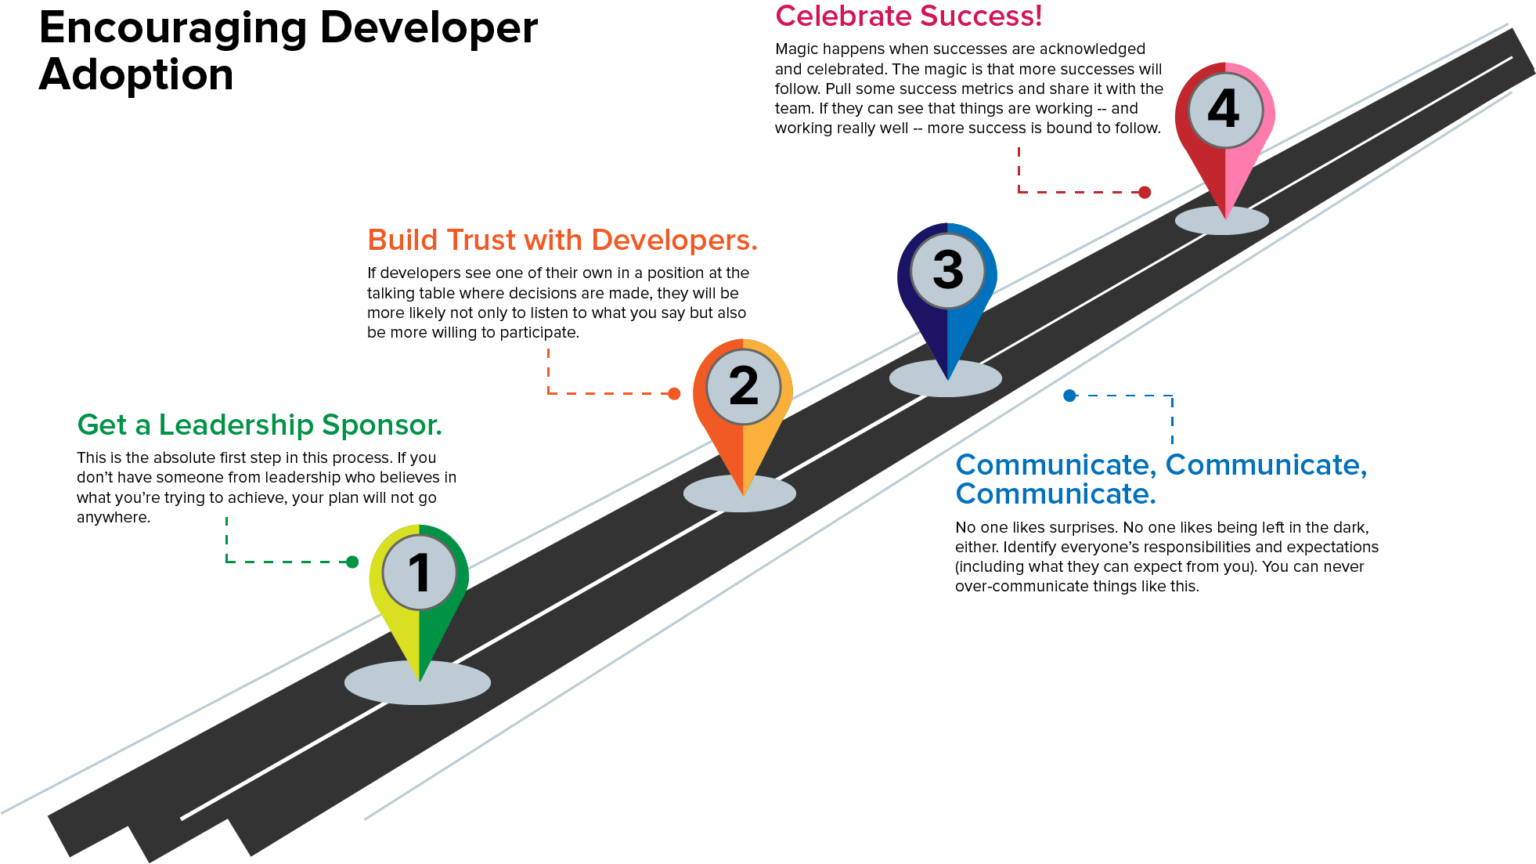 Infographic representing a road with colorful markers labeled 1, 2, 3, and 4, each including a heading and short text to elaborate upon a step toward successfully encouraging adoption.